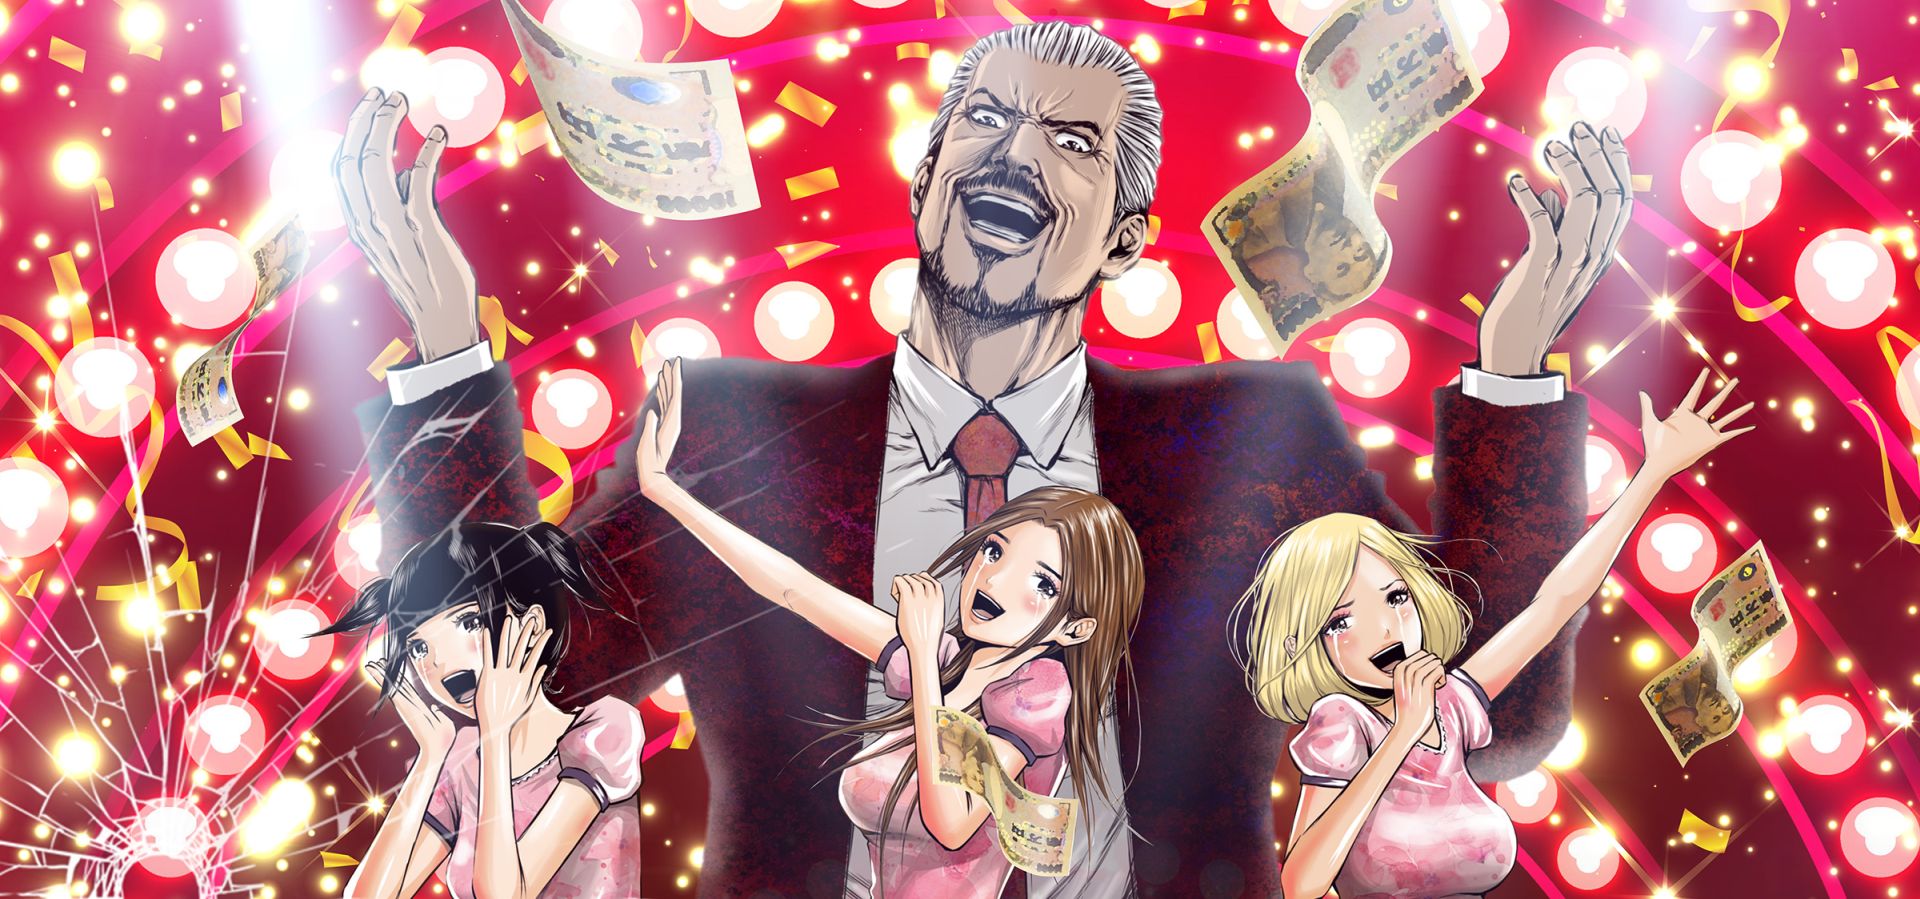 Here Are Two Japanese Promos For The Back Street Girls Anime